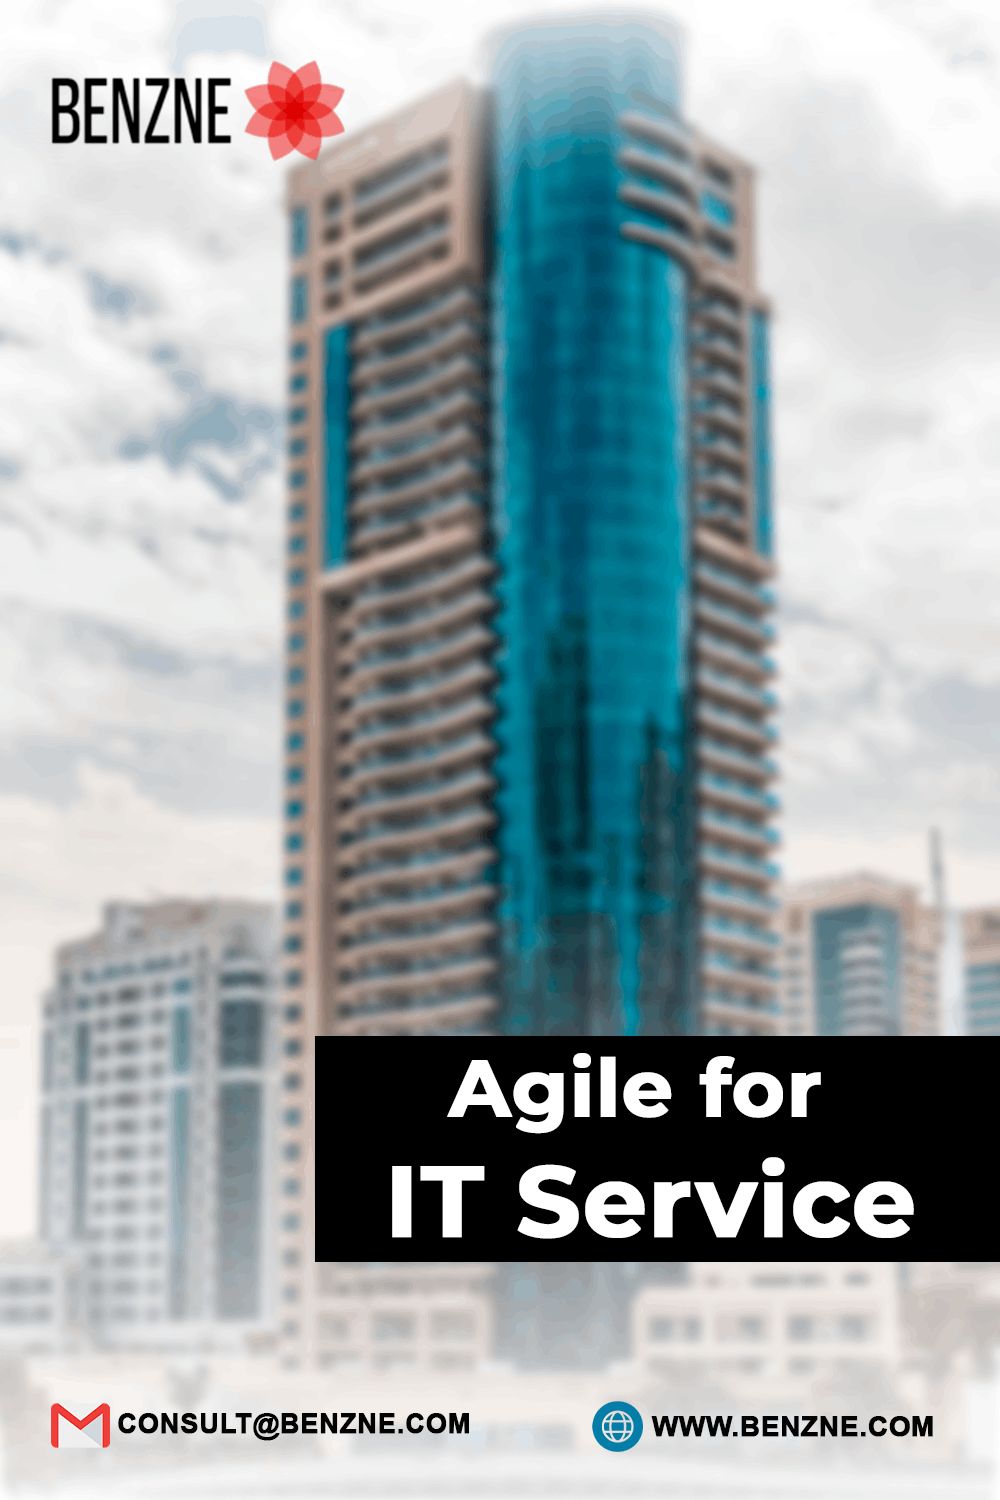 Driving Technological Advancement And Growth Together With Benzne Agile IT Services